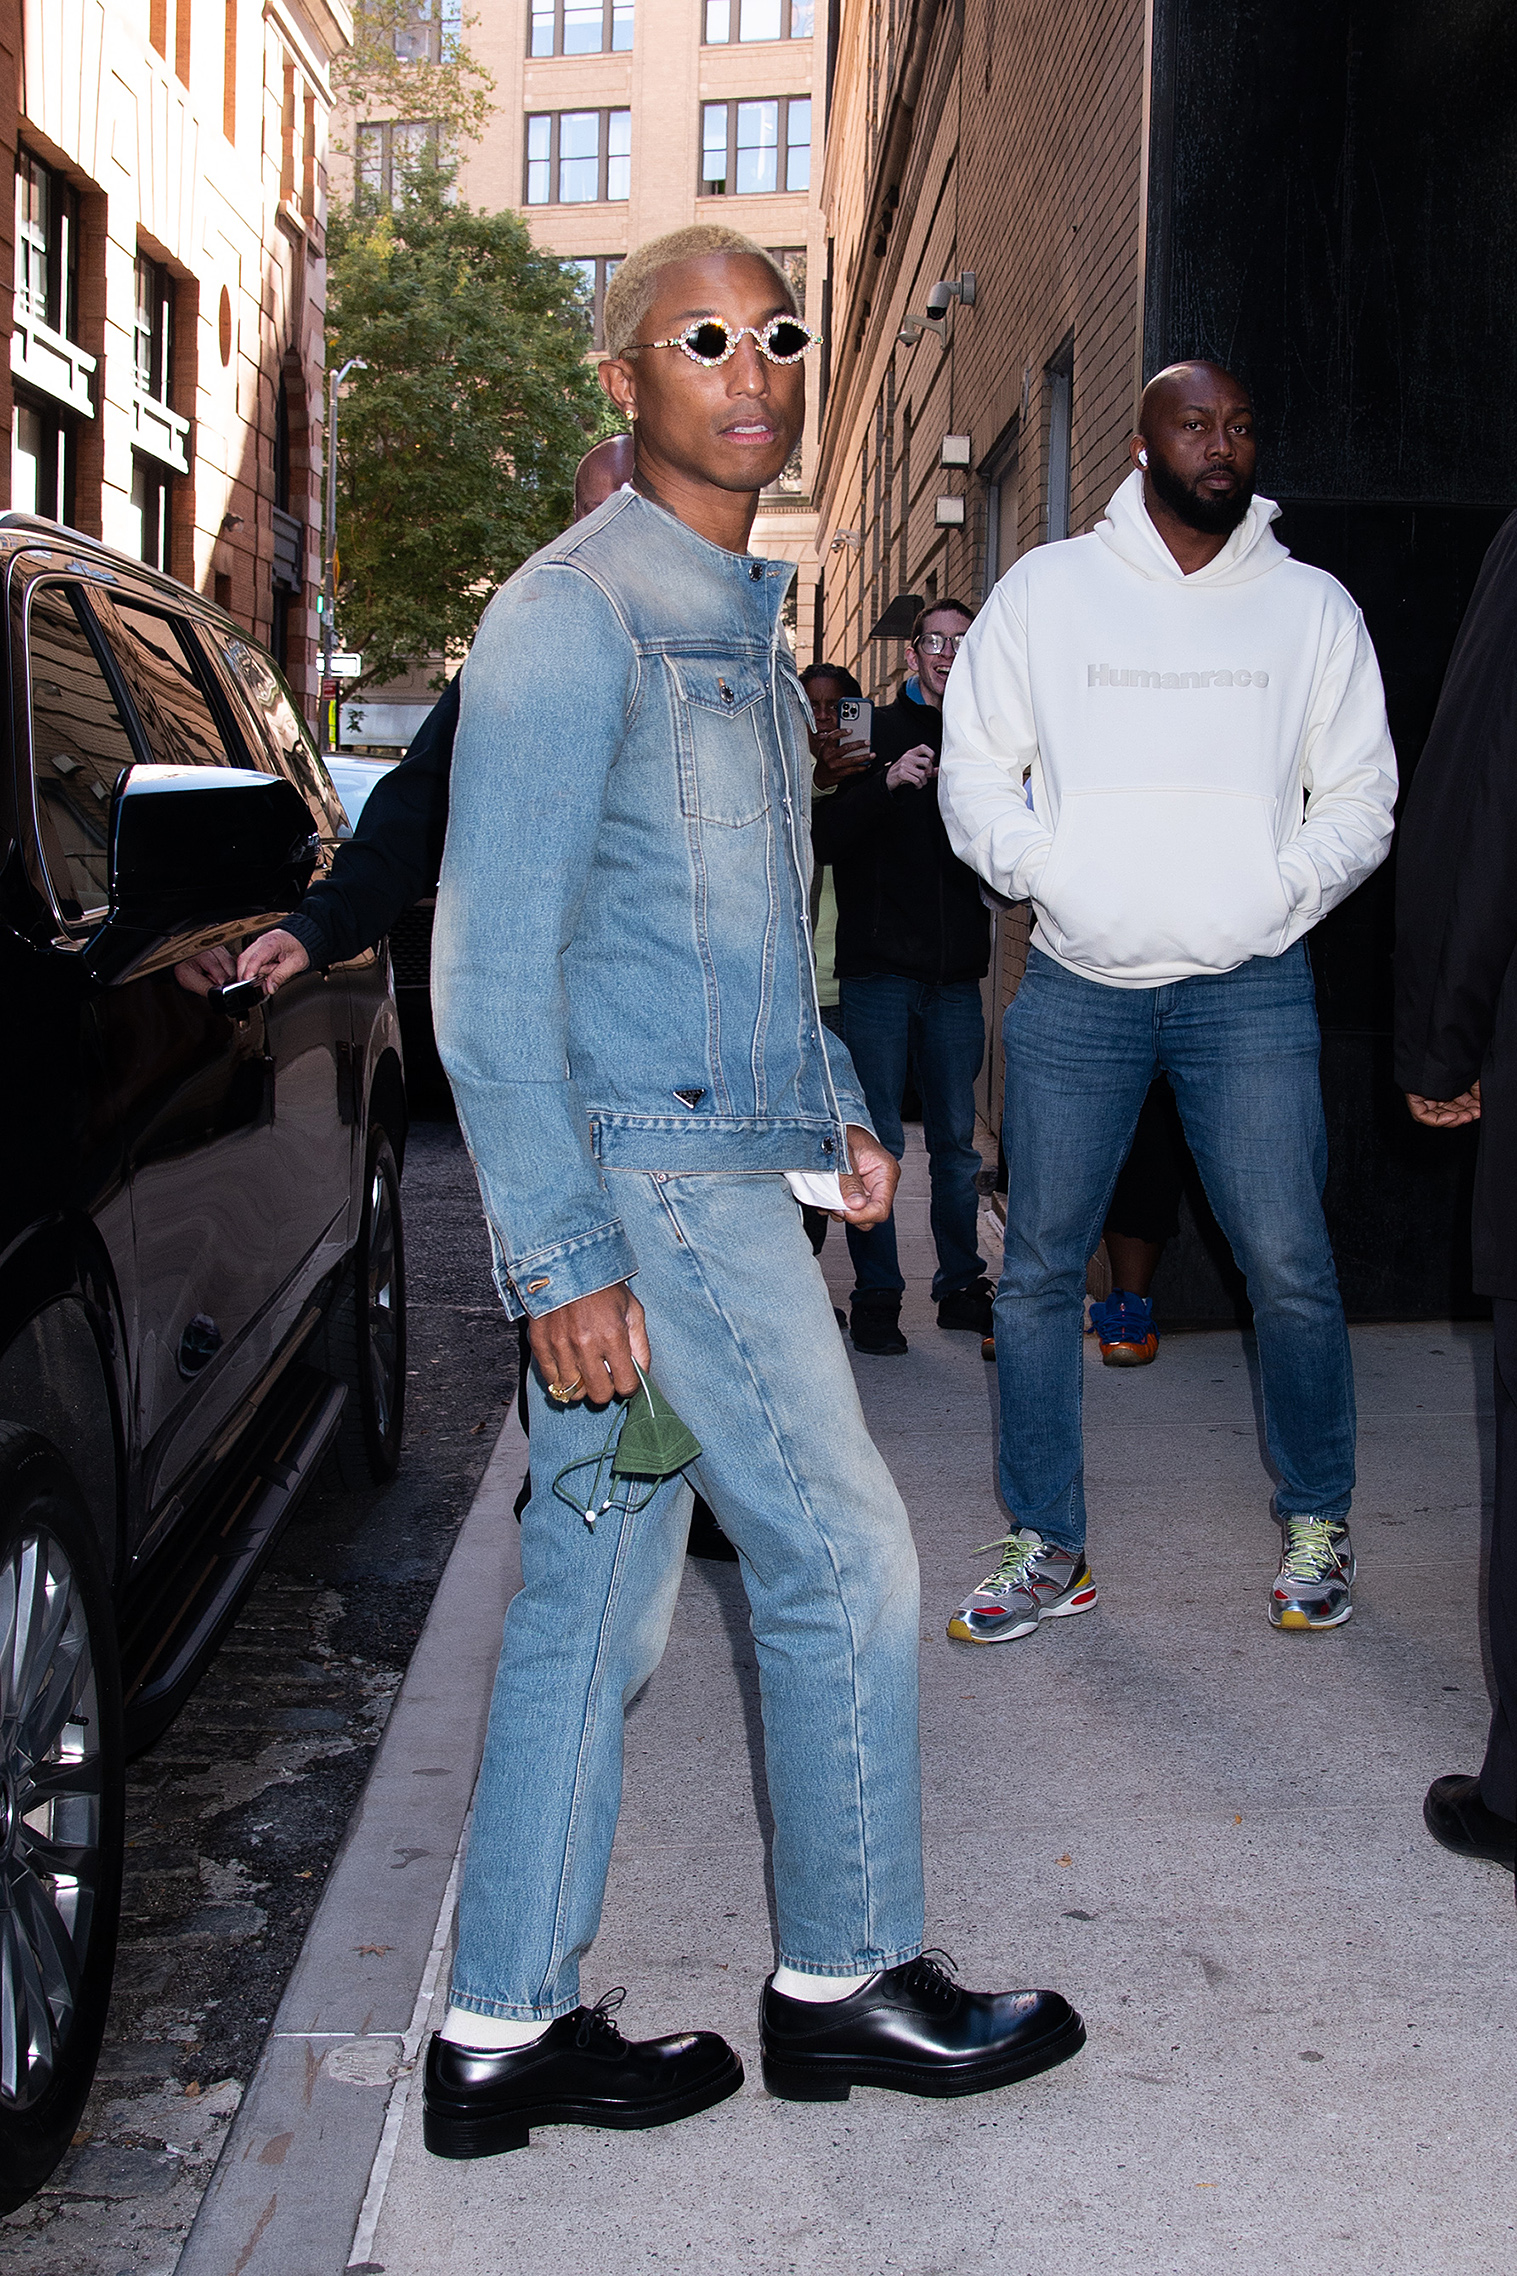 Pharrell Williams wore a PRADA Denim out in on October 14th, 2022, in New York City.